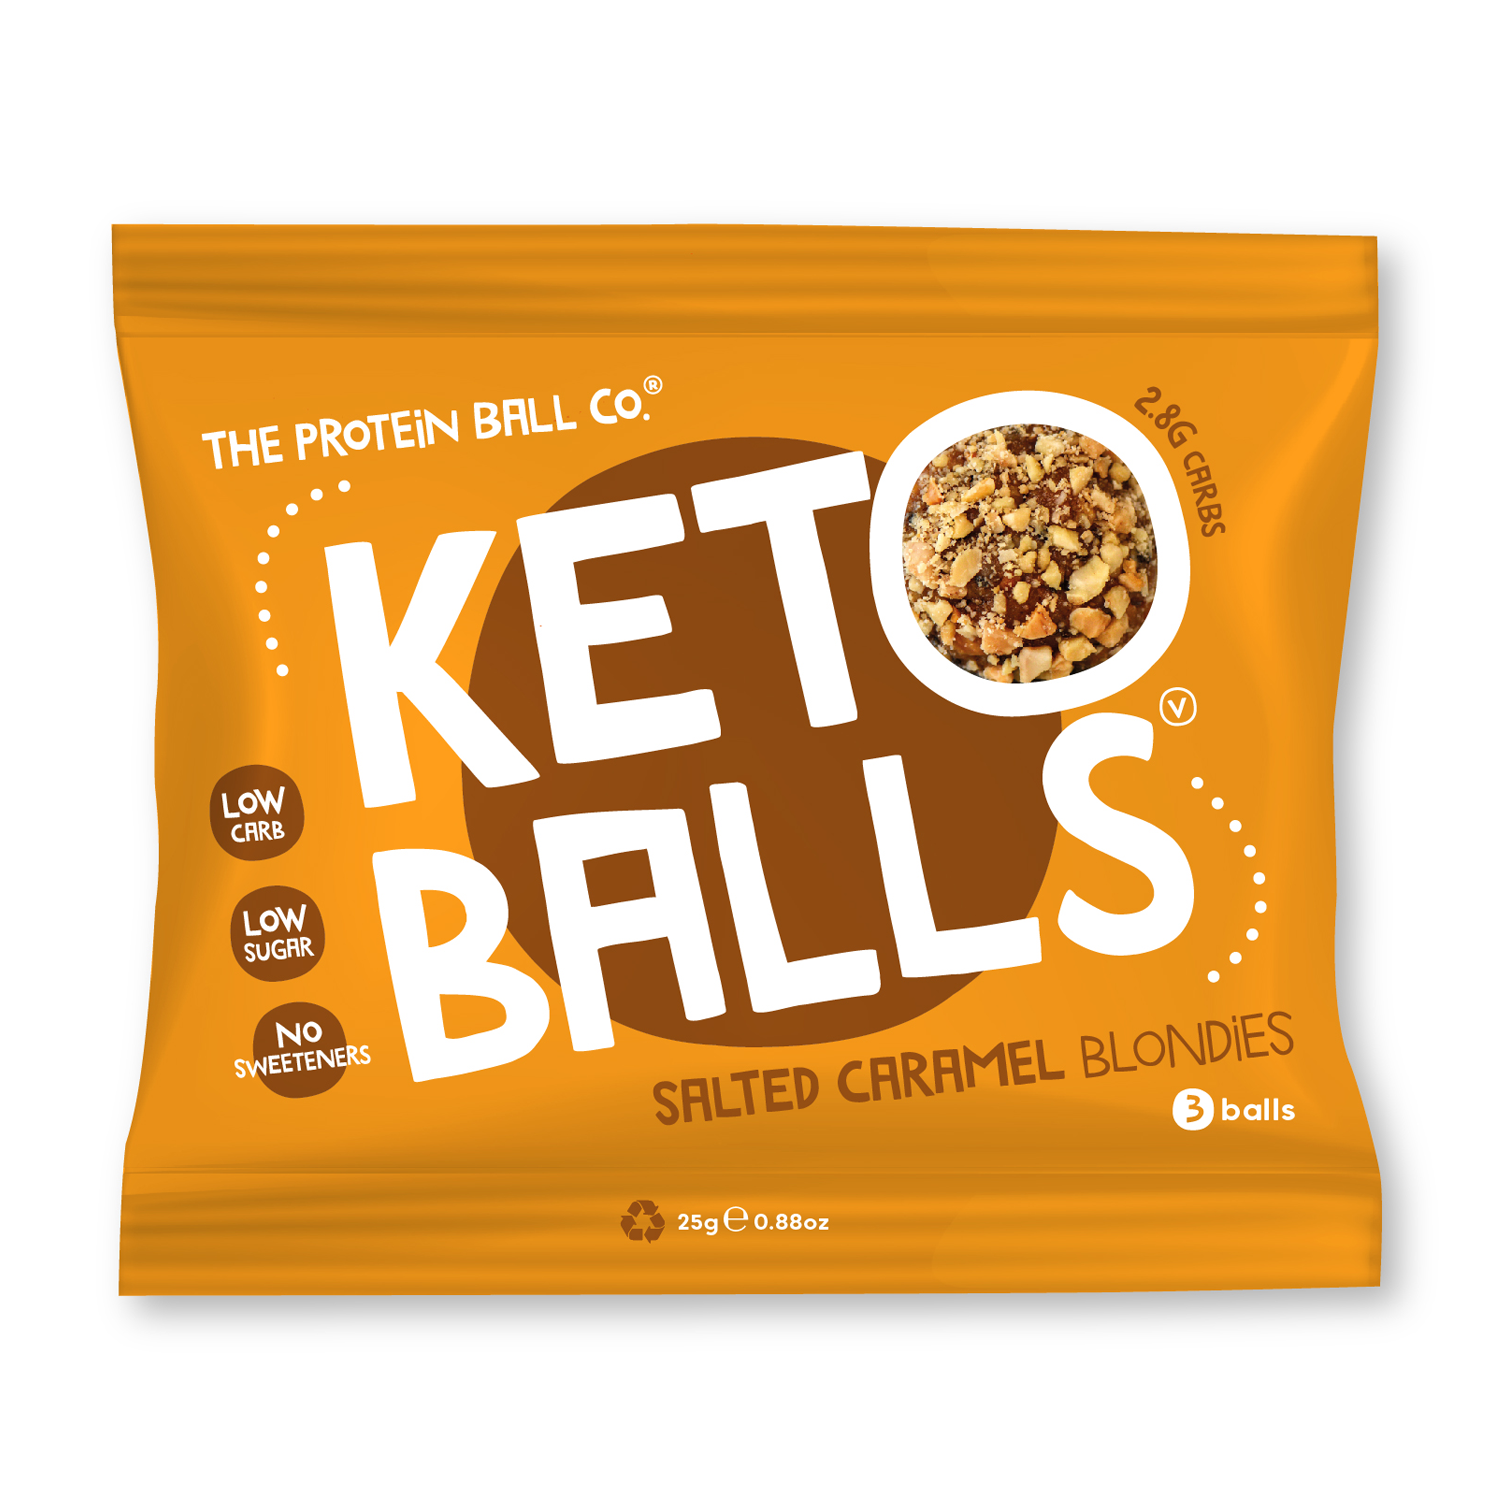 The Protein Ball Co launches new Keto Balls snack range